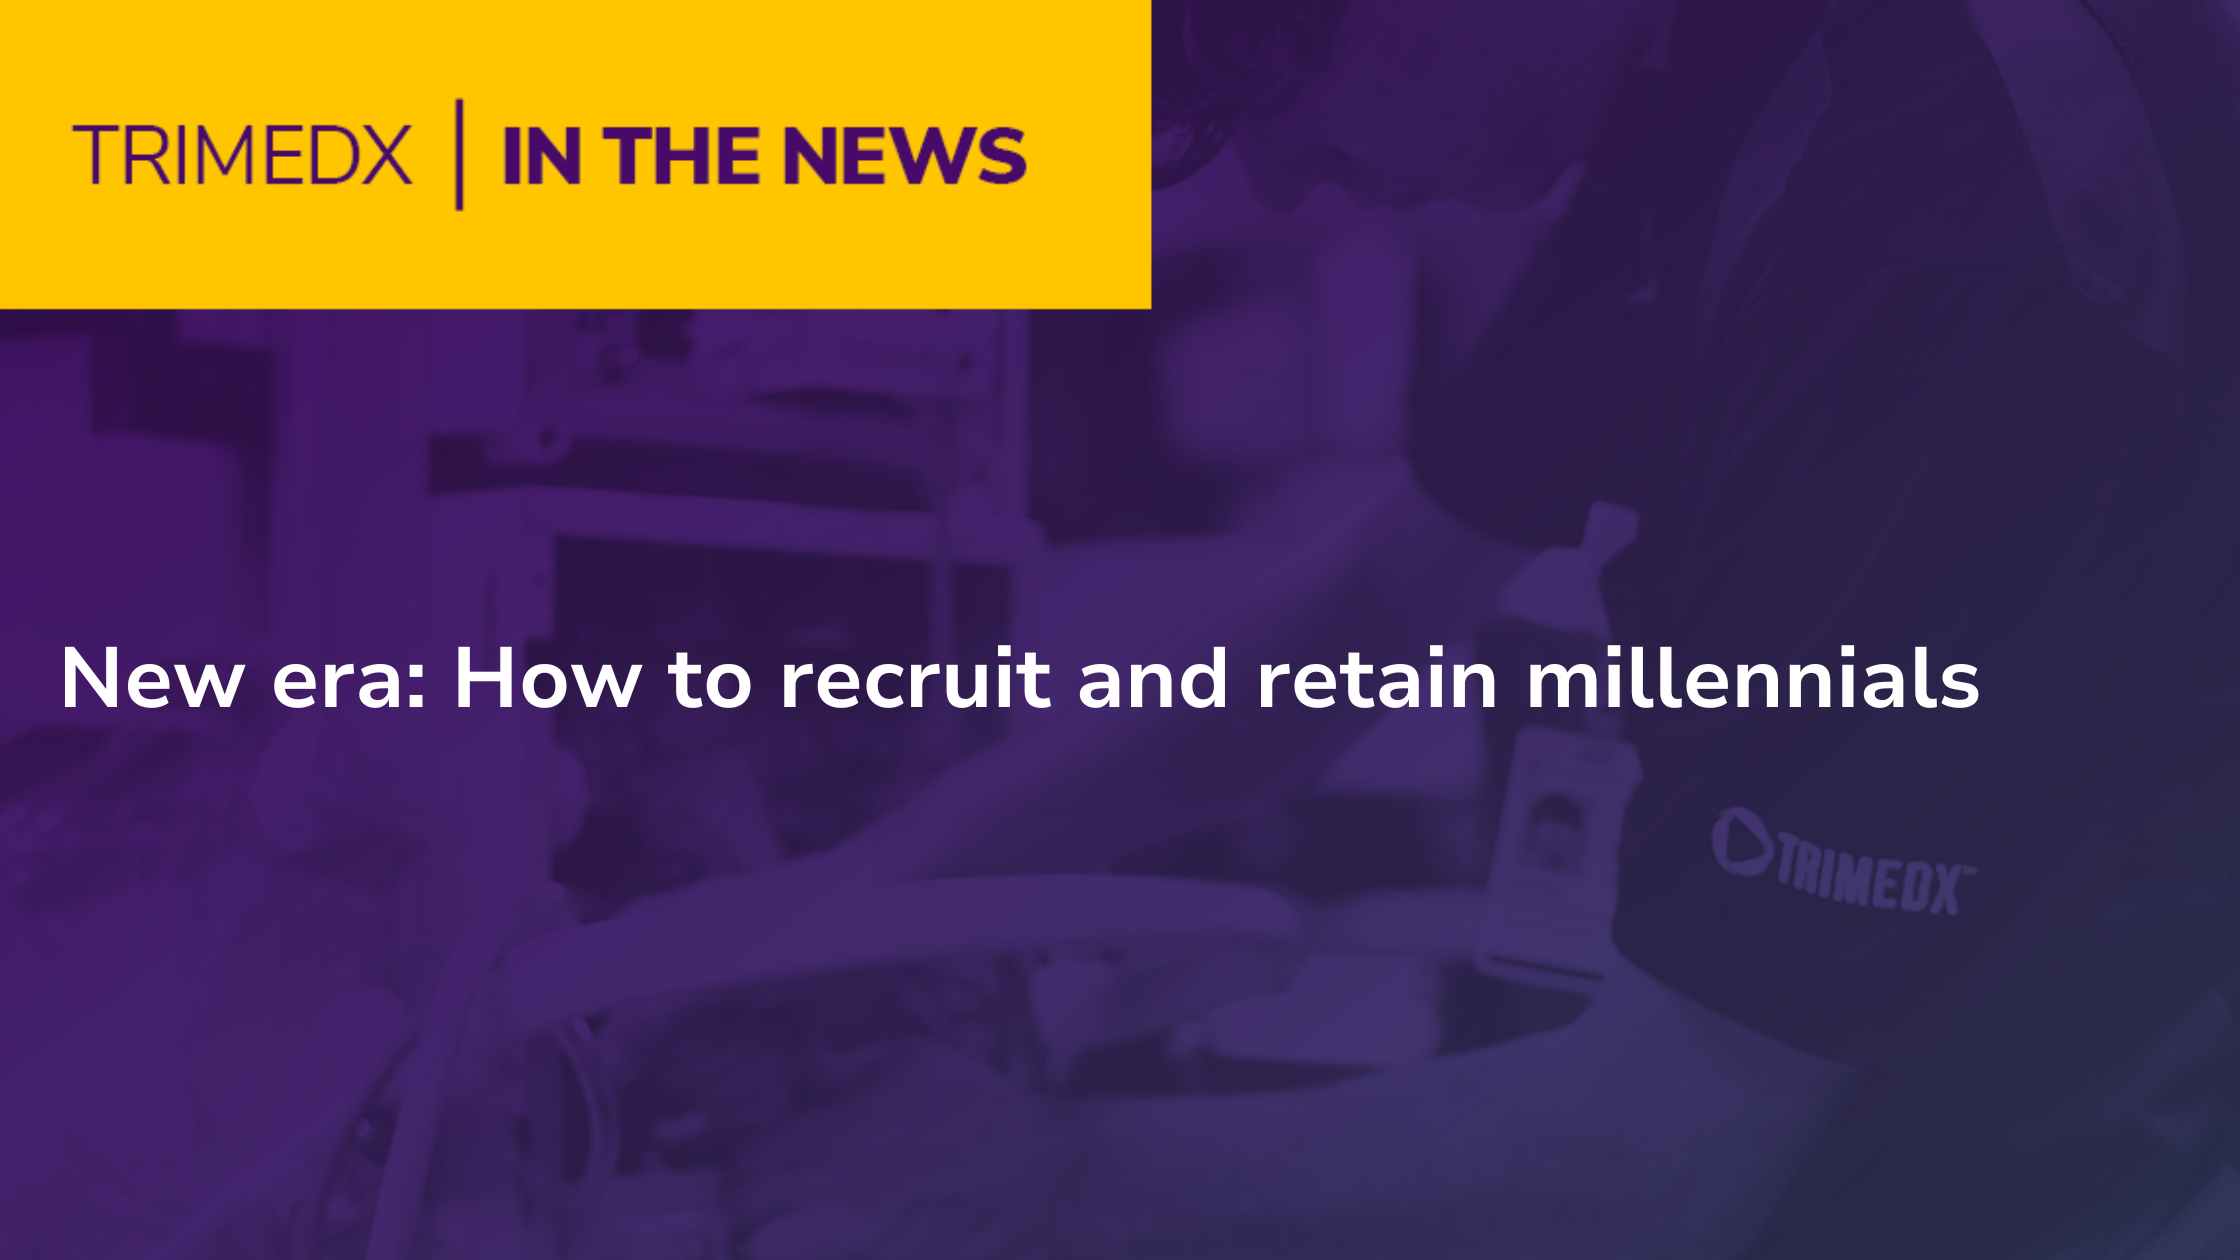 New era: How to recruit and retain millennials TRIMEDX thought leadership